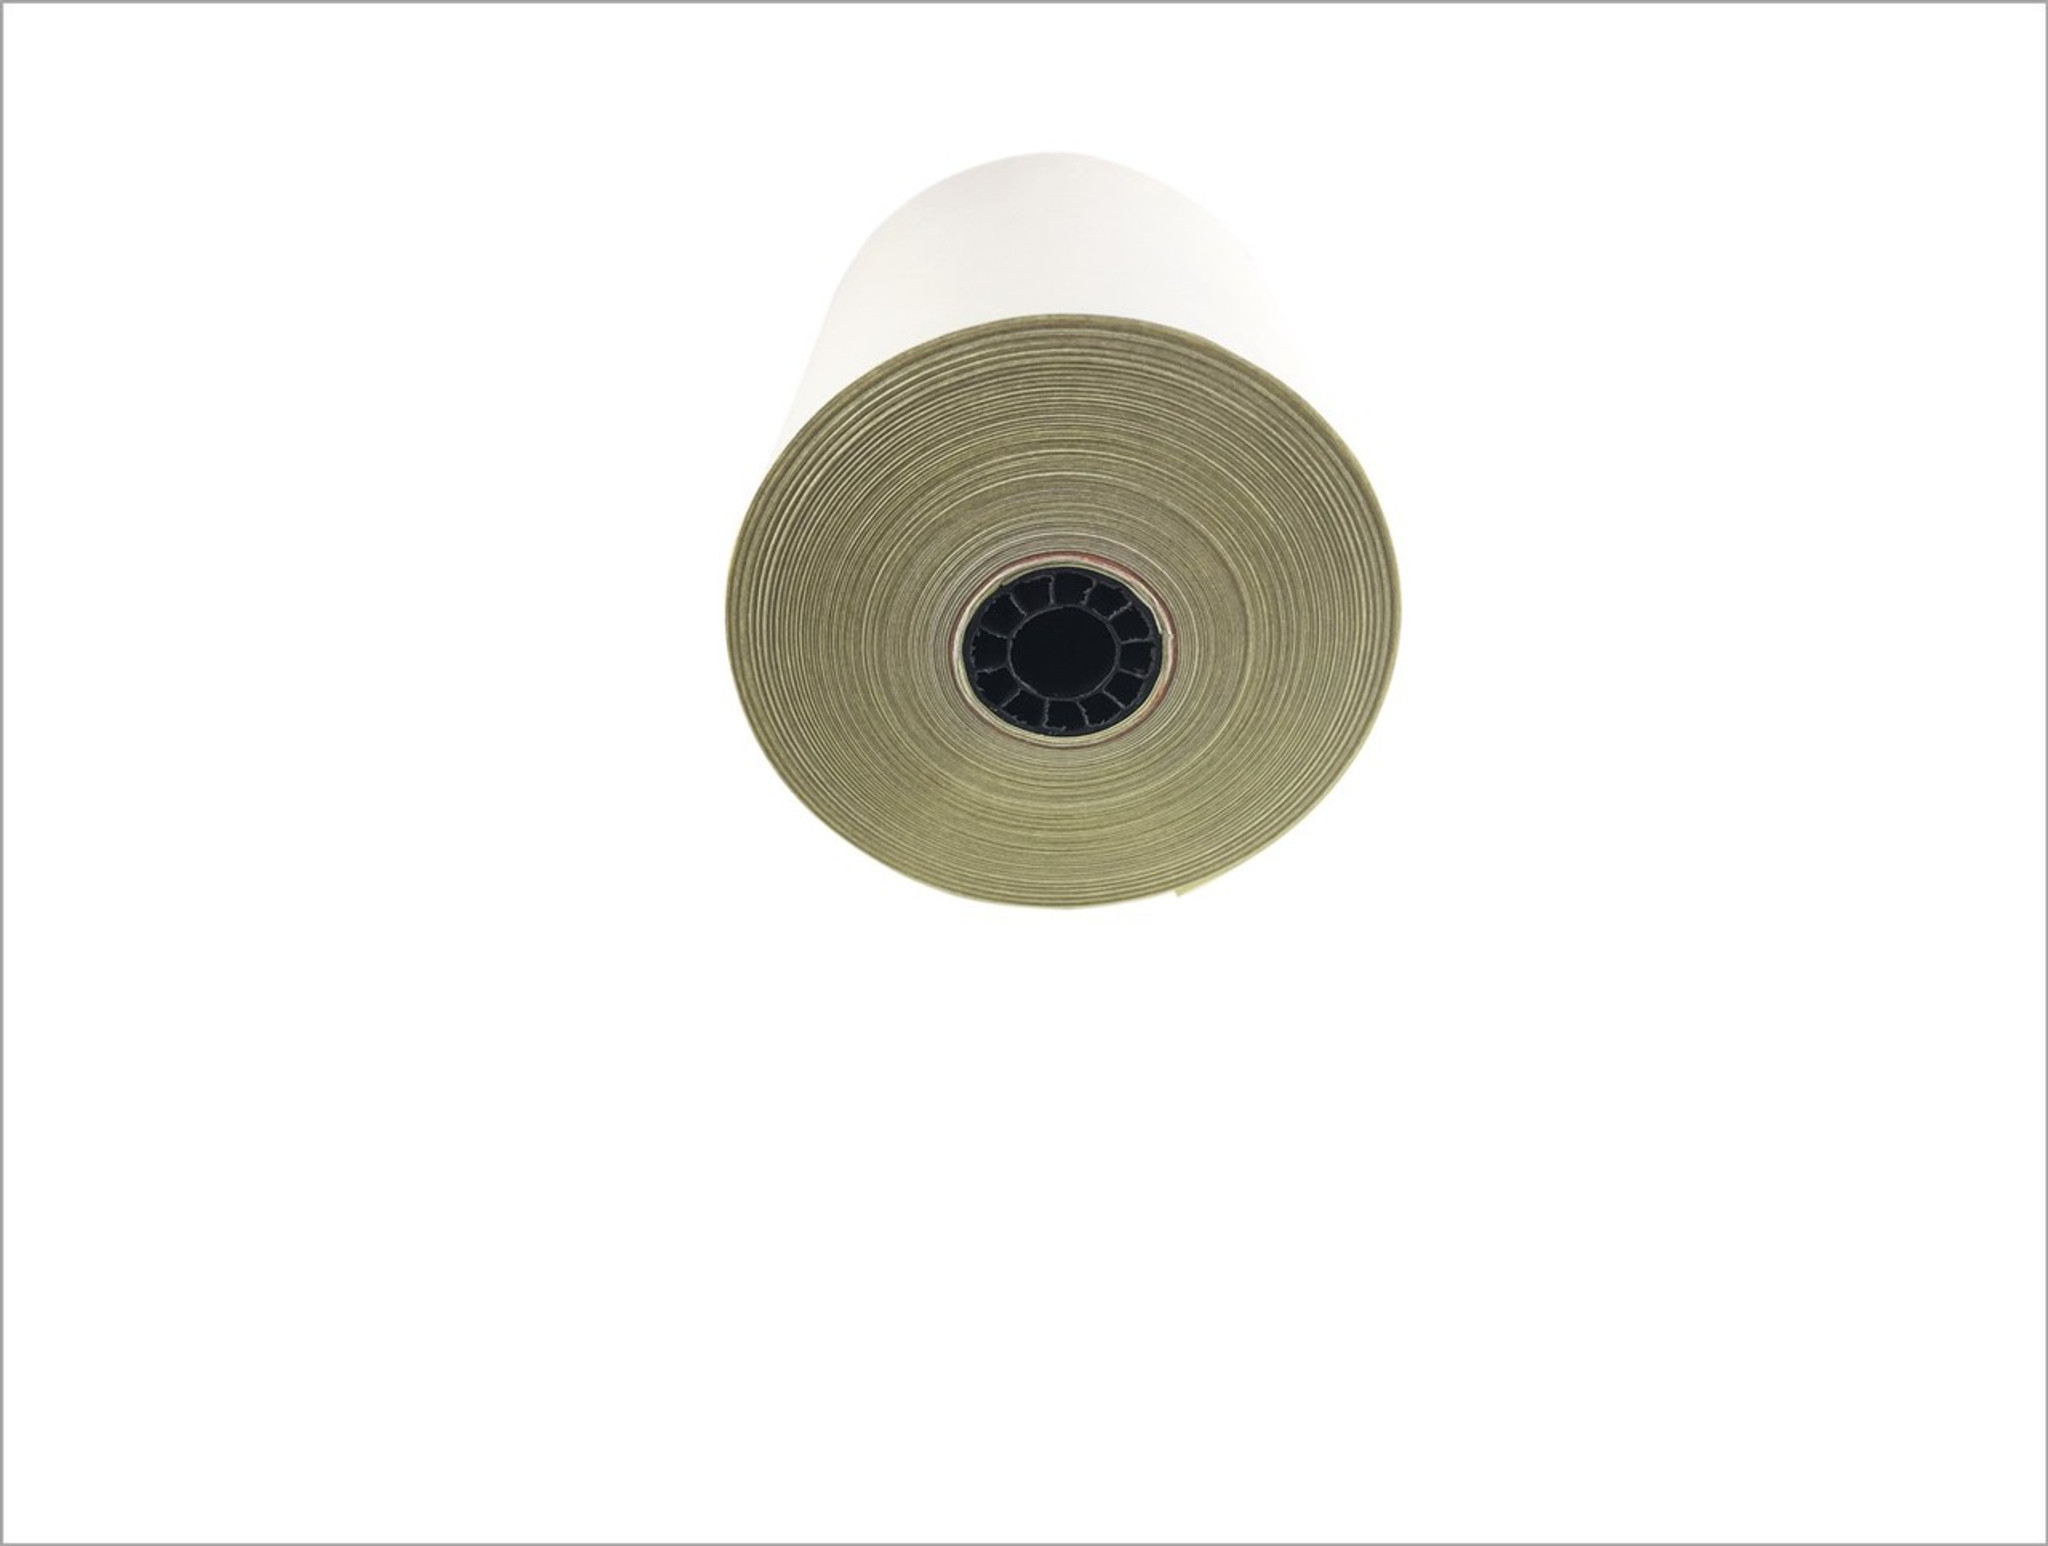 2 Ply 3 inch 90' ft 100 Rolls Carbonless Paper Rolls White/Canary Two Ply Kitchen Printer paper,two Ply Carbonless Rolls